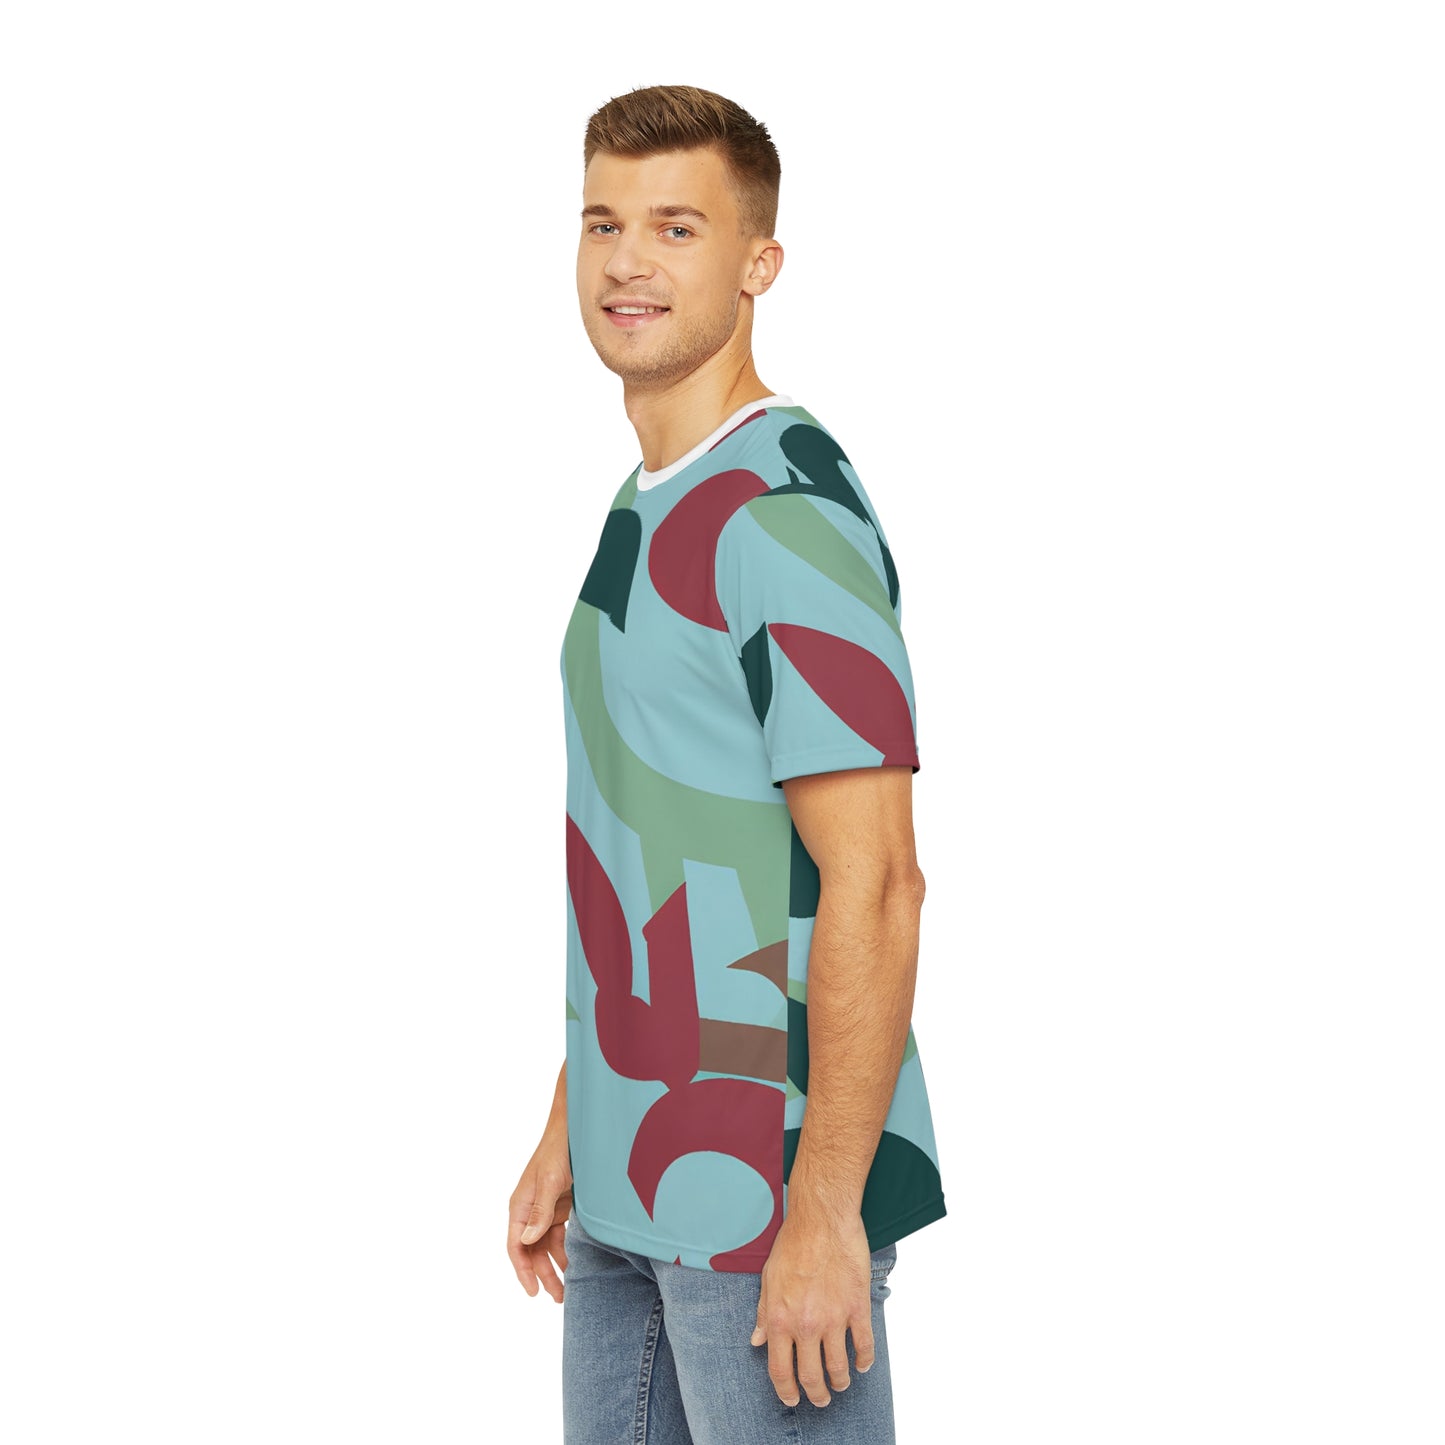 Chaparral Ione - Men's Expression Shirt